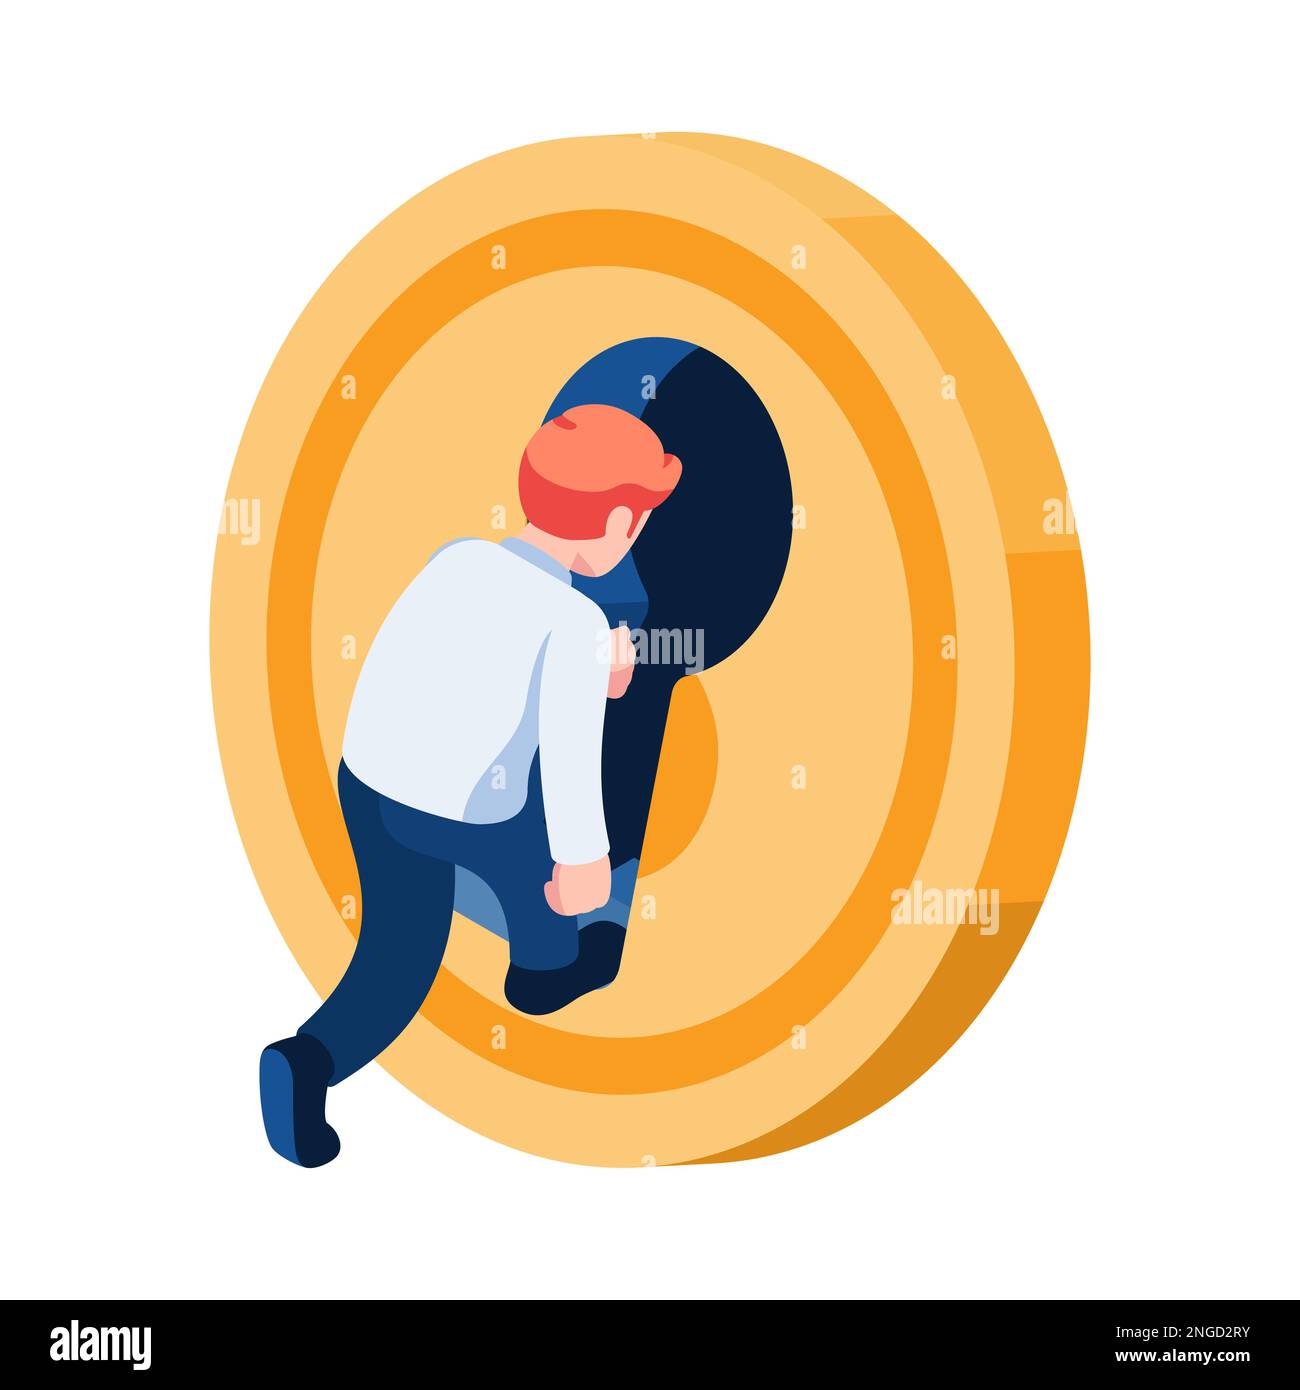 Flat 3d Isometric Businessman Walking into Money Coin. Business Insider and Financial Expert Concept. Stock Vector